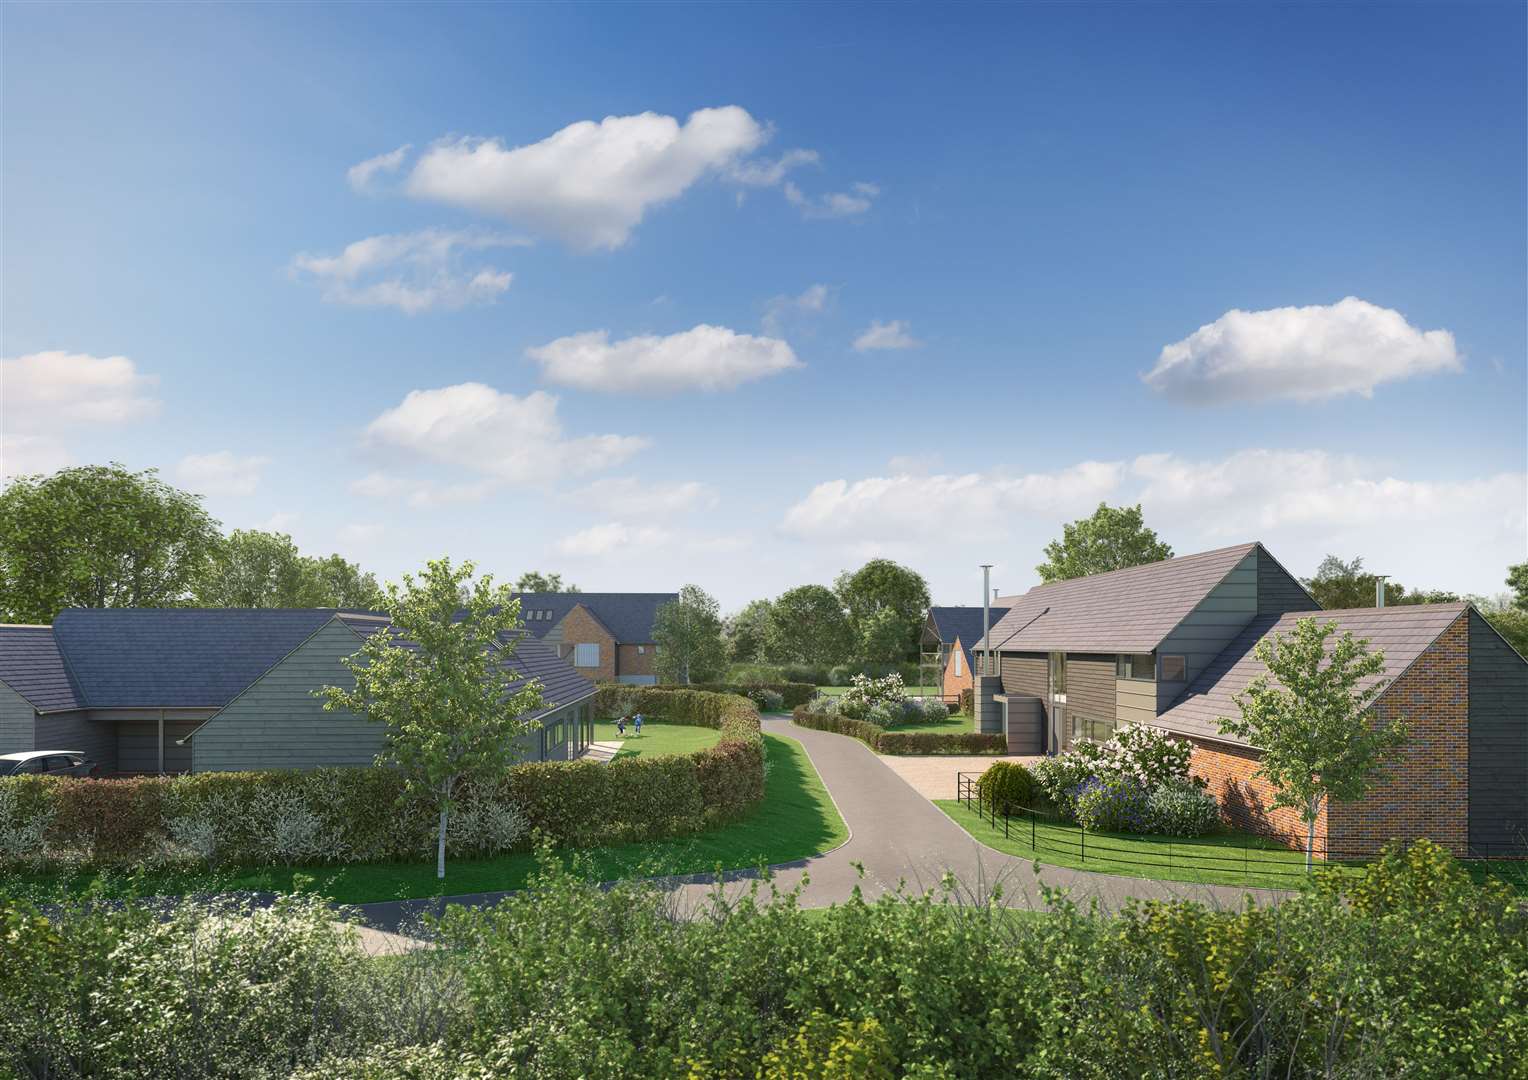 An artist's impression of how the development at Wickhambreaux would look